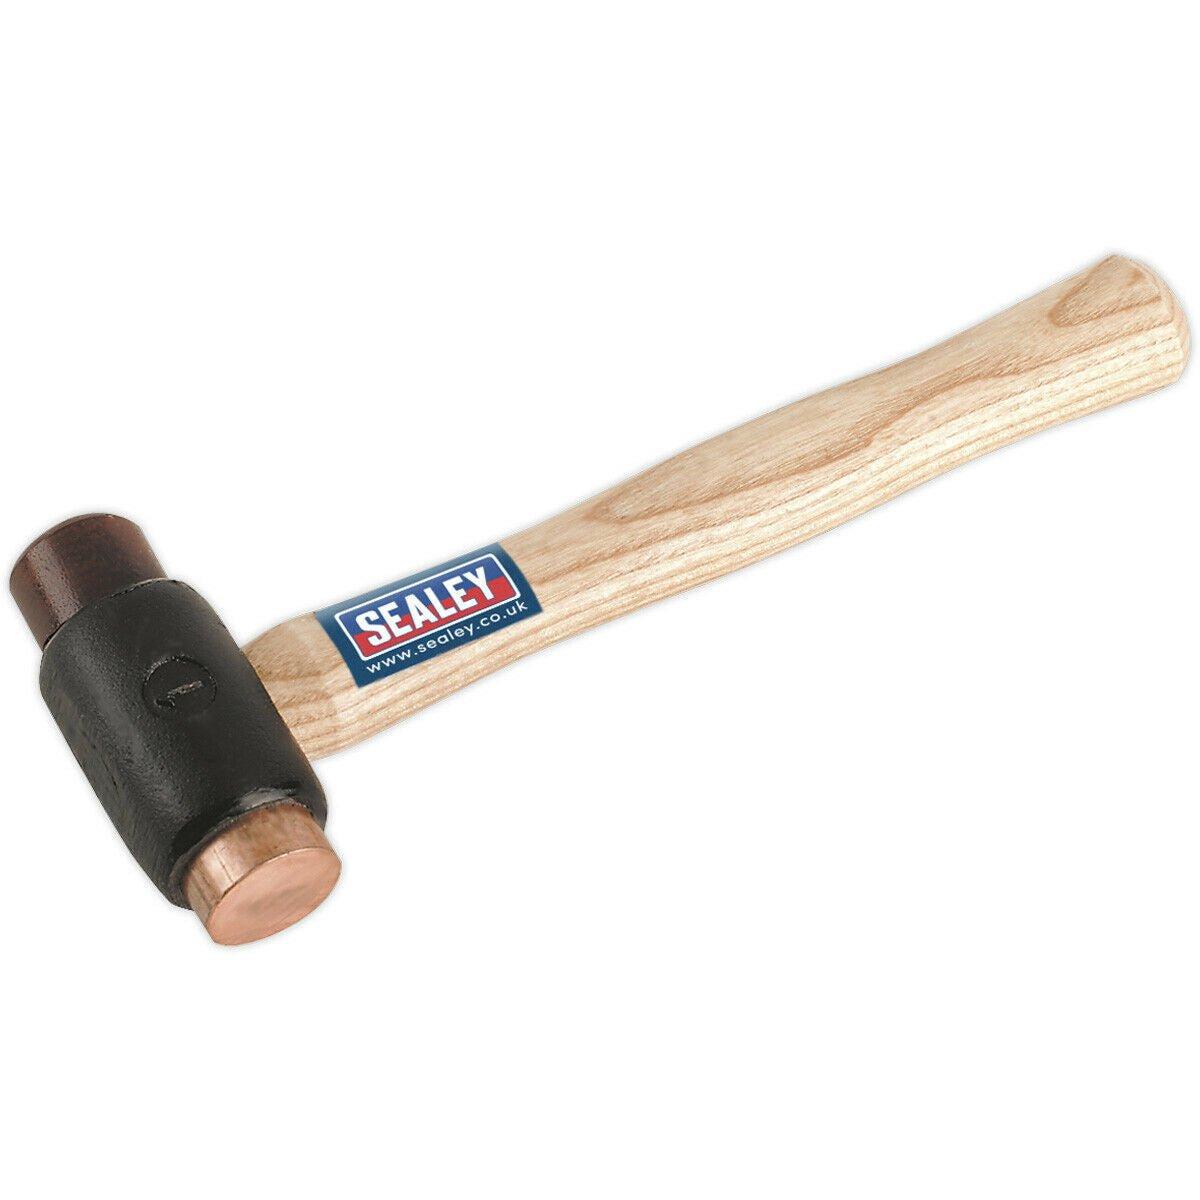 1.5lb Copper and Rawhide Faced Hammer - Hickory Wooden Shaft - Iron Head